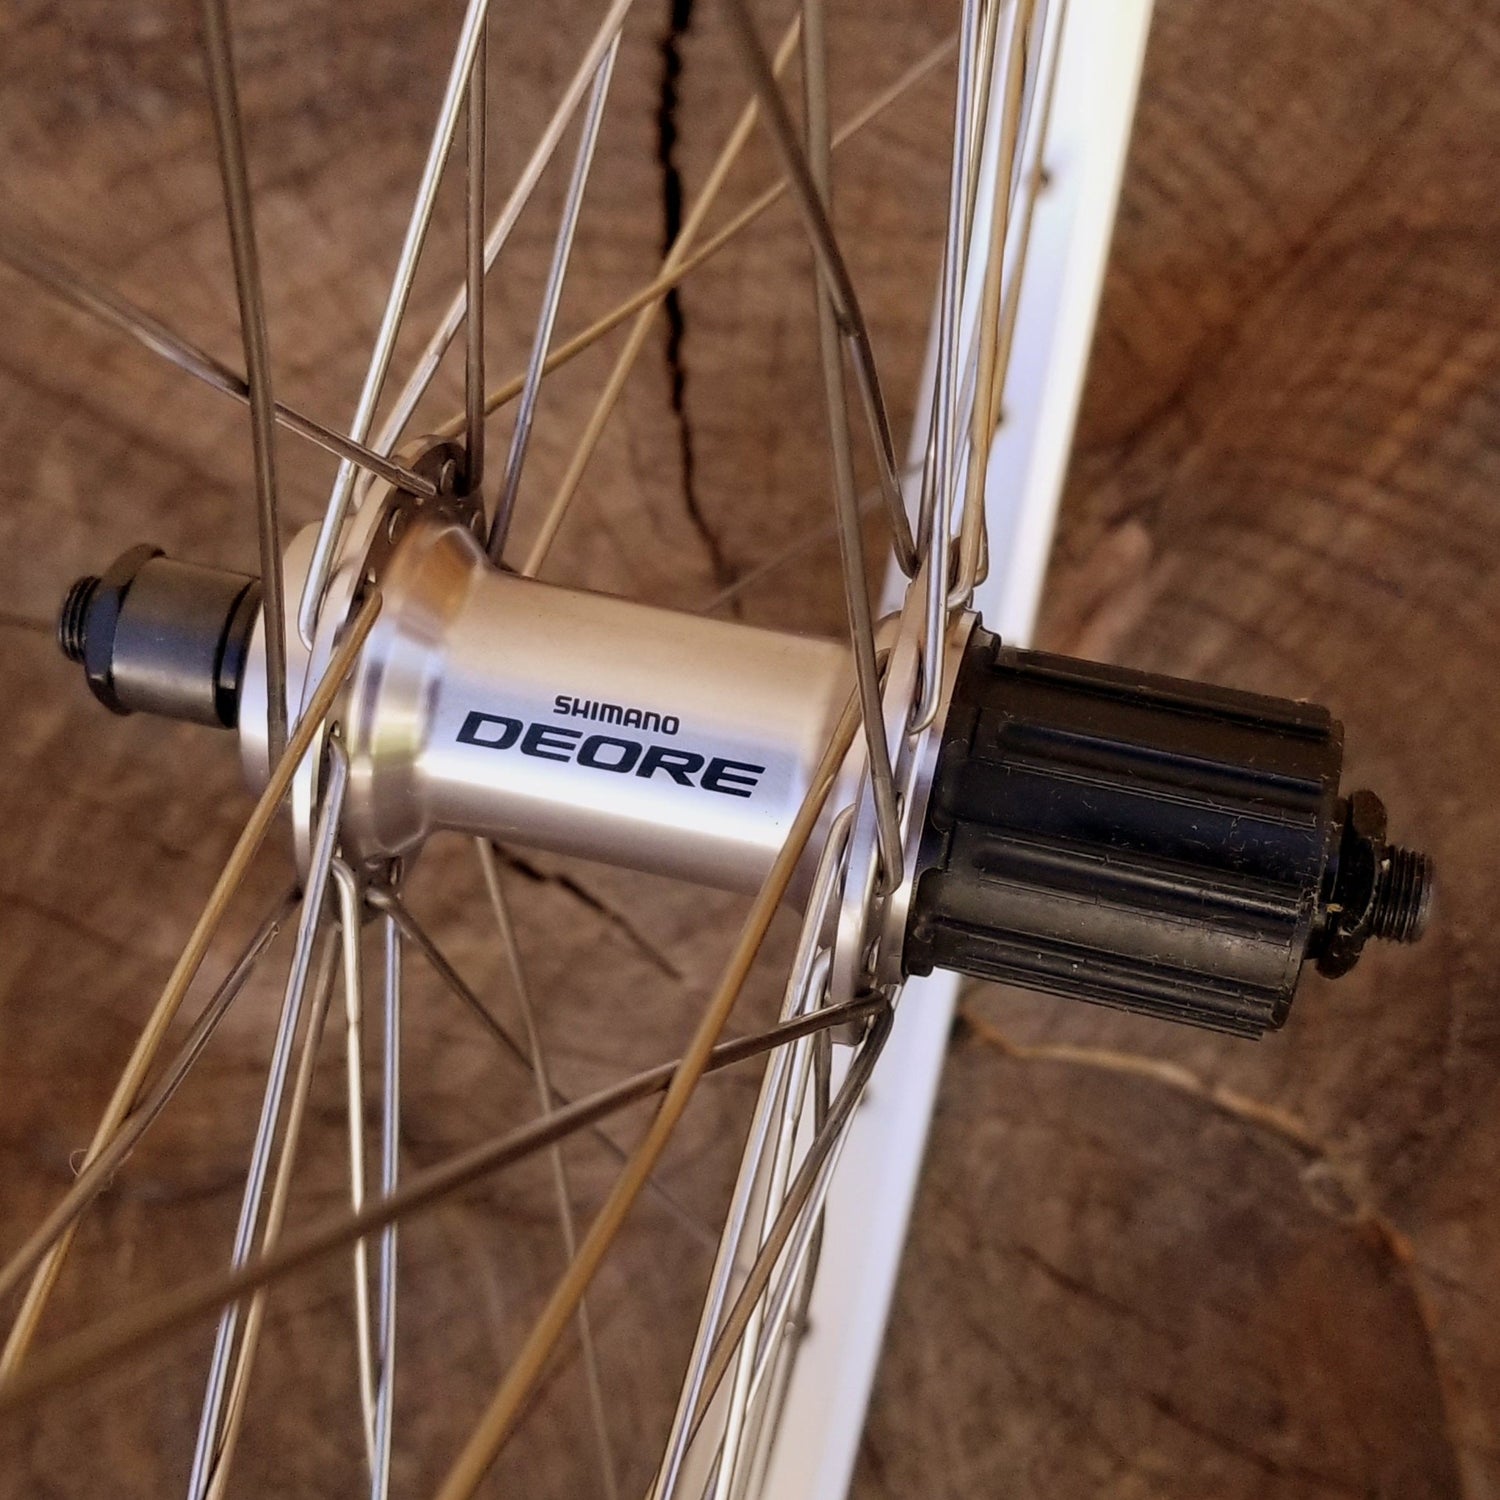 Wheelset - Velocity-Built Alex rims with Shimano Deore hubs (vbw)